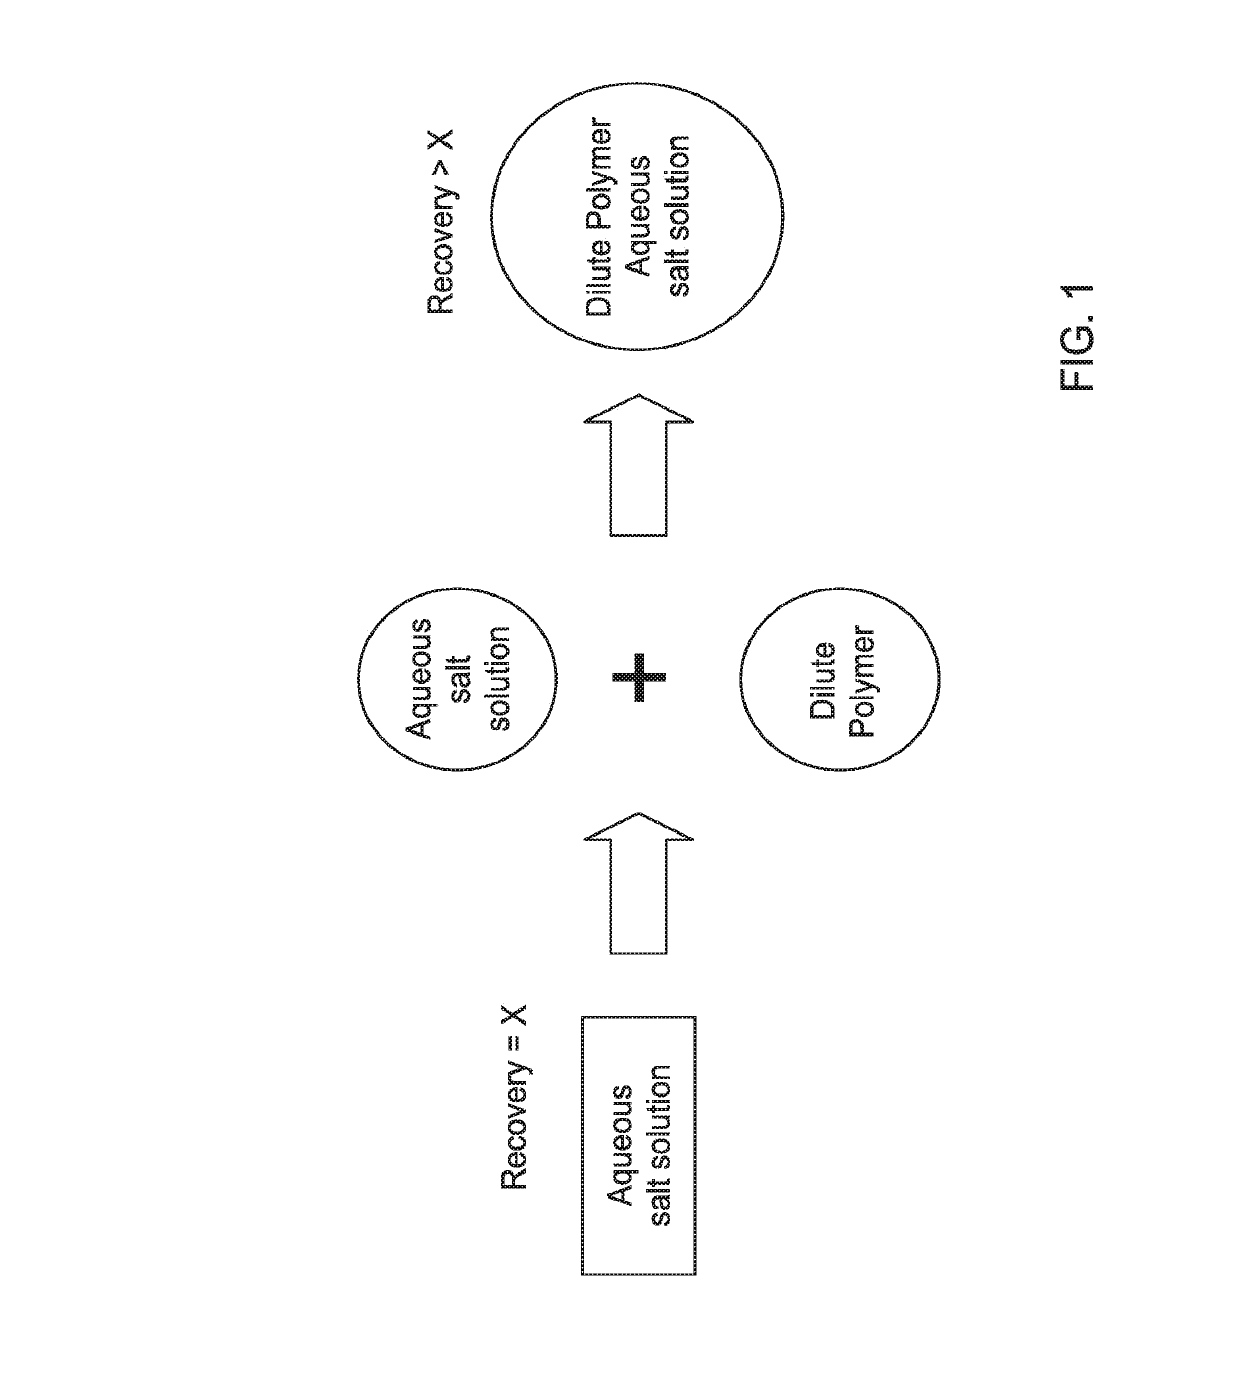 Oil Recovery Process Using an Oil Recovery Composition of Aqueous Salt Solution and Dilute Polymer for Carbonate Reservoirs